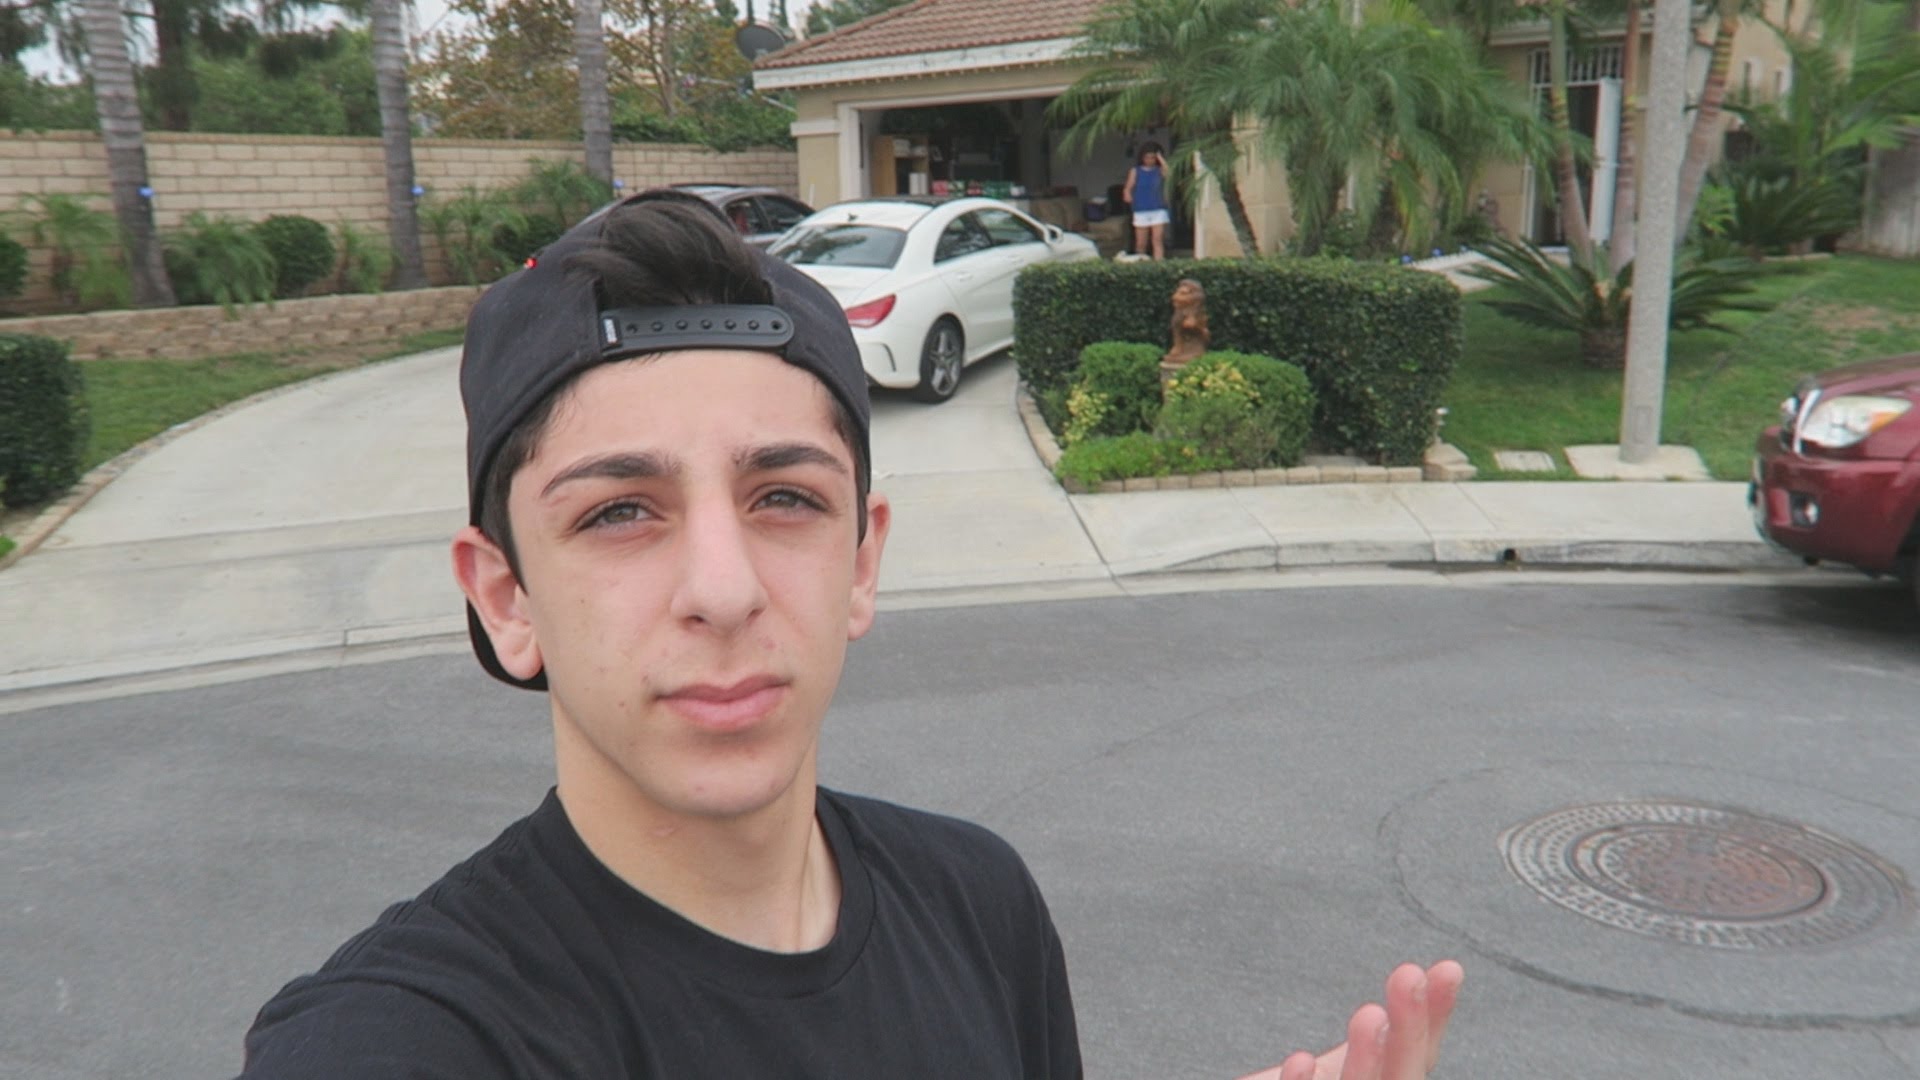 Read more about FaZe Rug: Real Name, Wedding, Brother, Parents, Nationality...